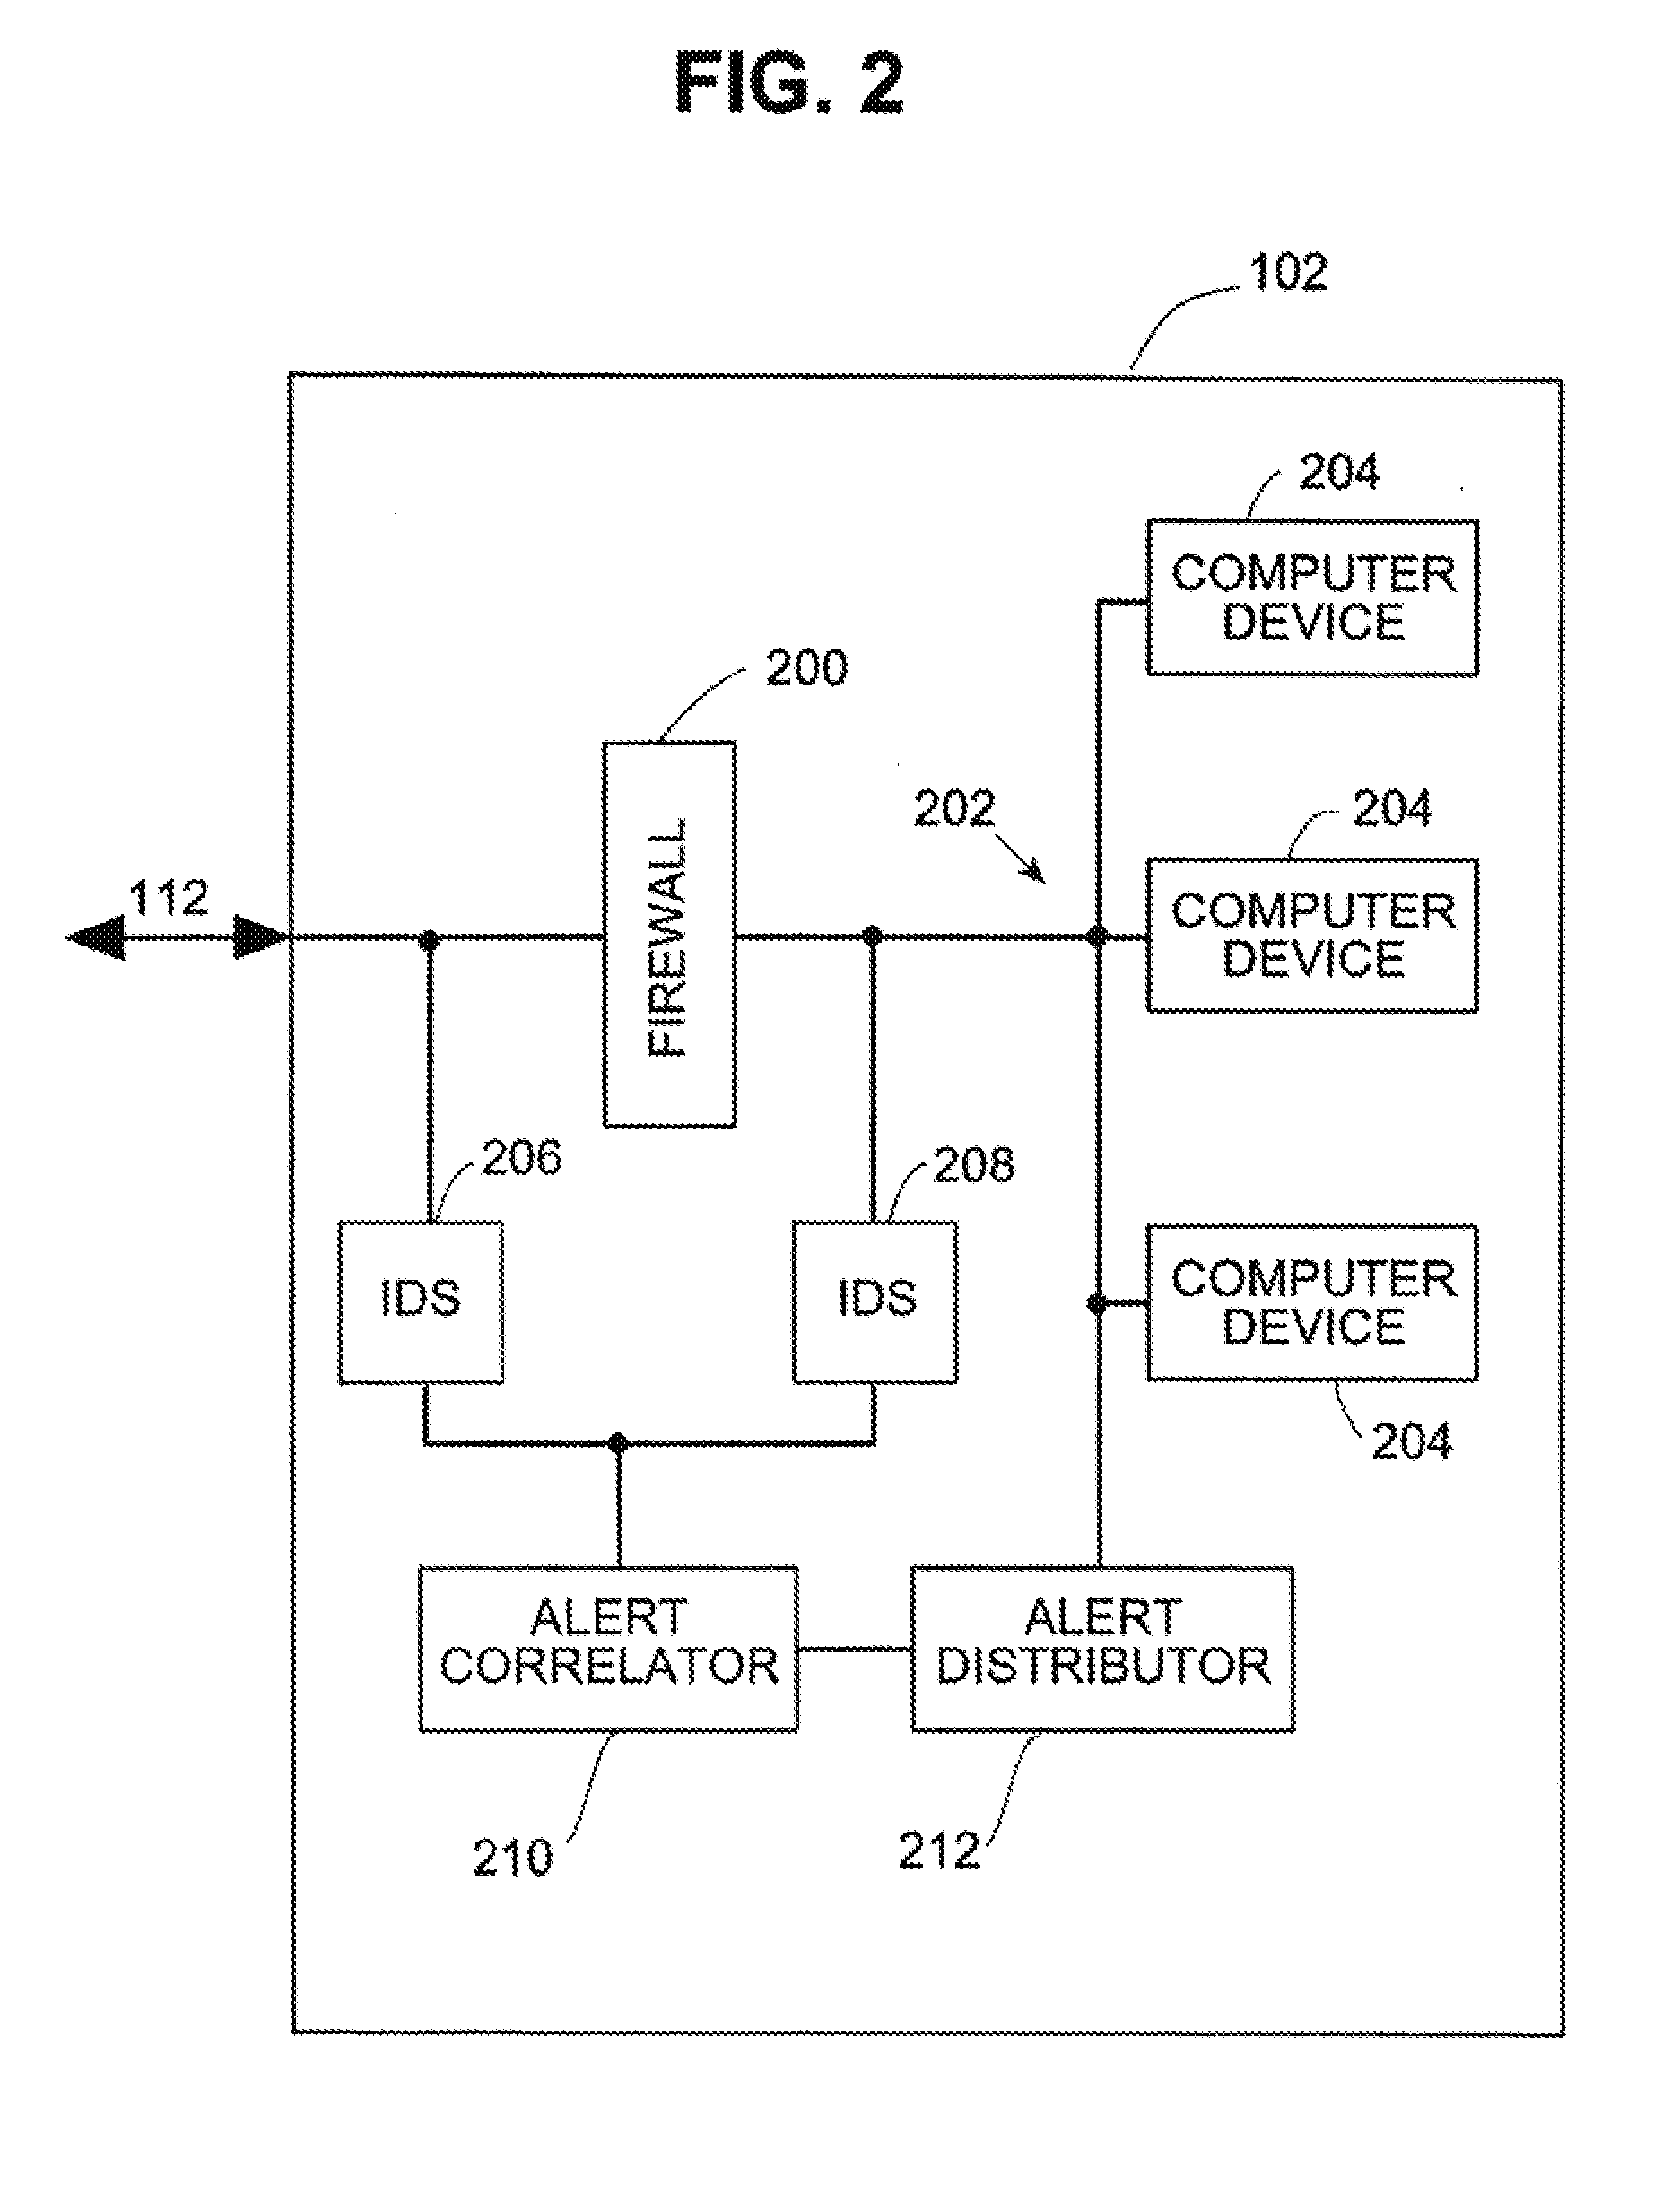 Systems and Methods for Correlating and Distributing Intrusion Alert Information Among Collaborating Computer Systems